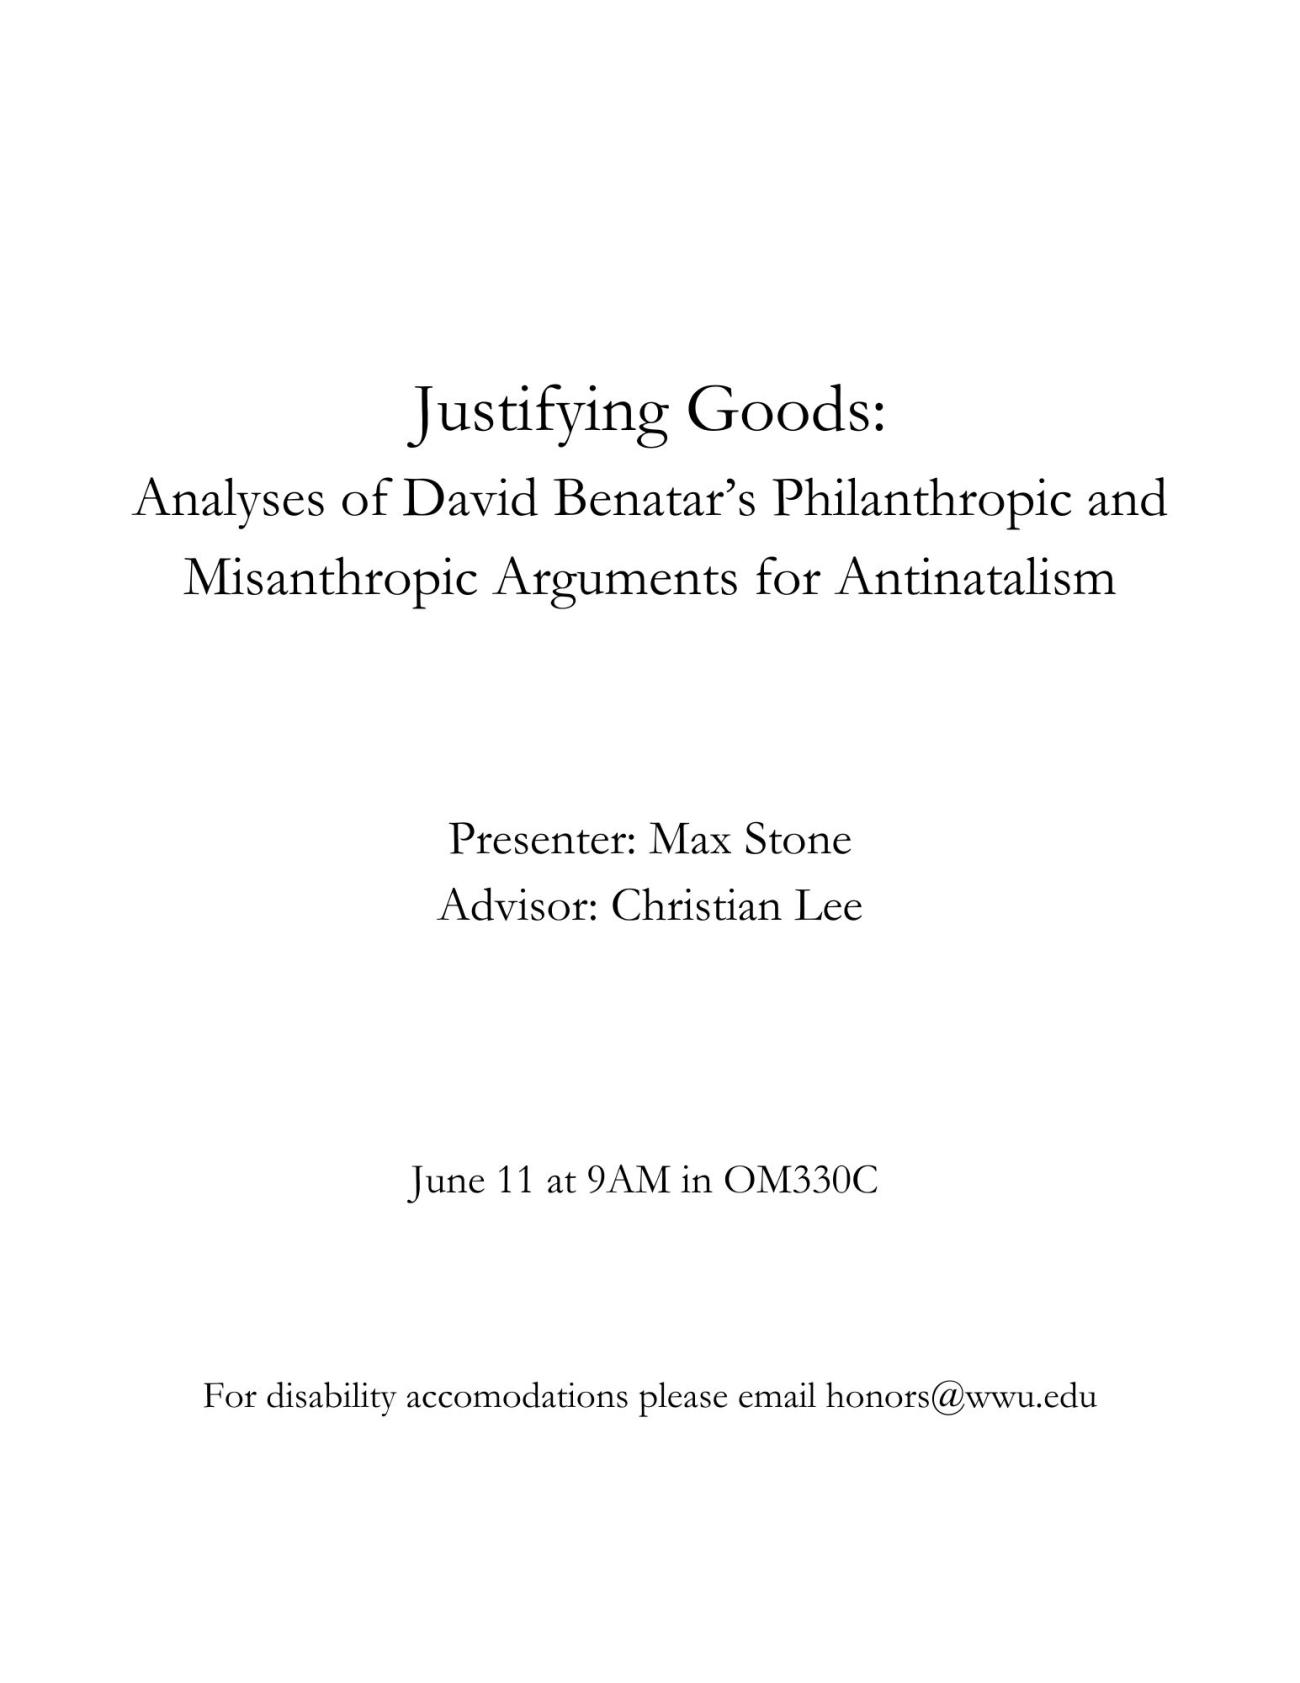 White background with black text readying: "Justifying Goods: Analyses of David Benatar’s Philanthropic and Misanthropic Arguments for Antinatalism. Presenter: Max Stone Advisor: Christian Lee. June 11 at 9AM in OM330C. For disability accommodations please email honors@wwu.edu".